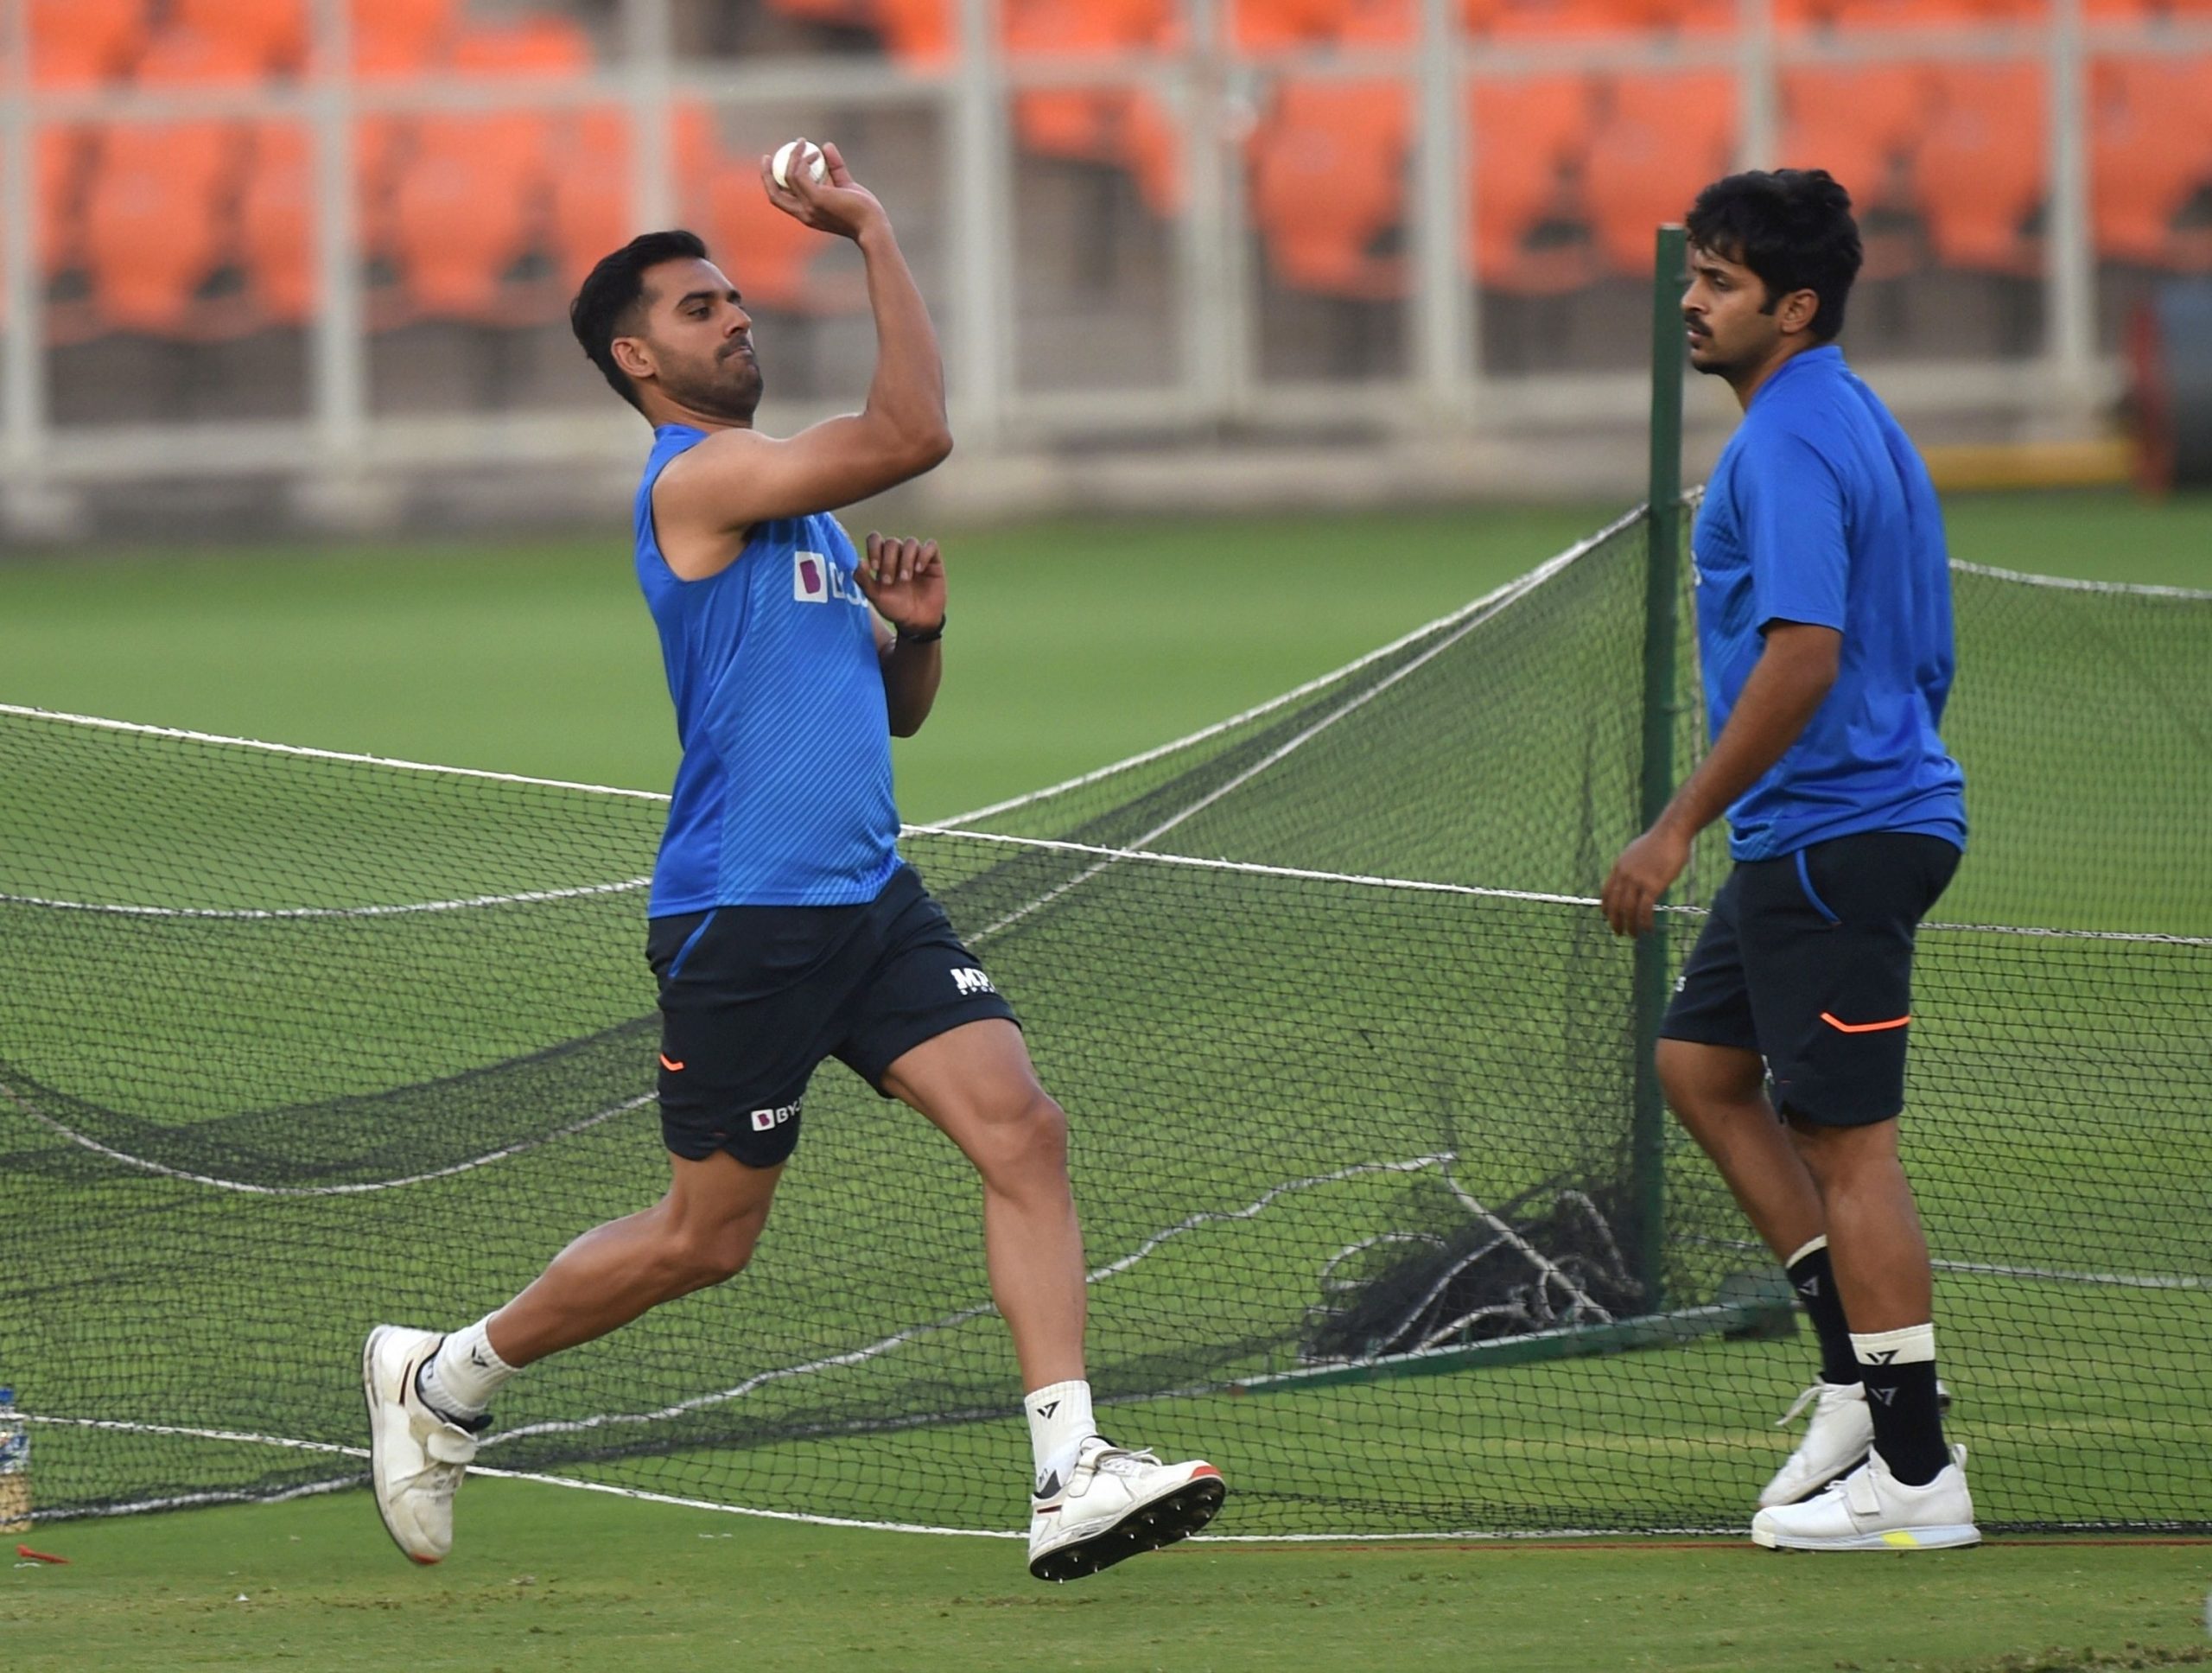 With Chahar, Venkatesh injured, India likely to dig deep into bench